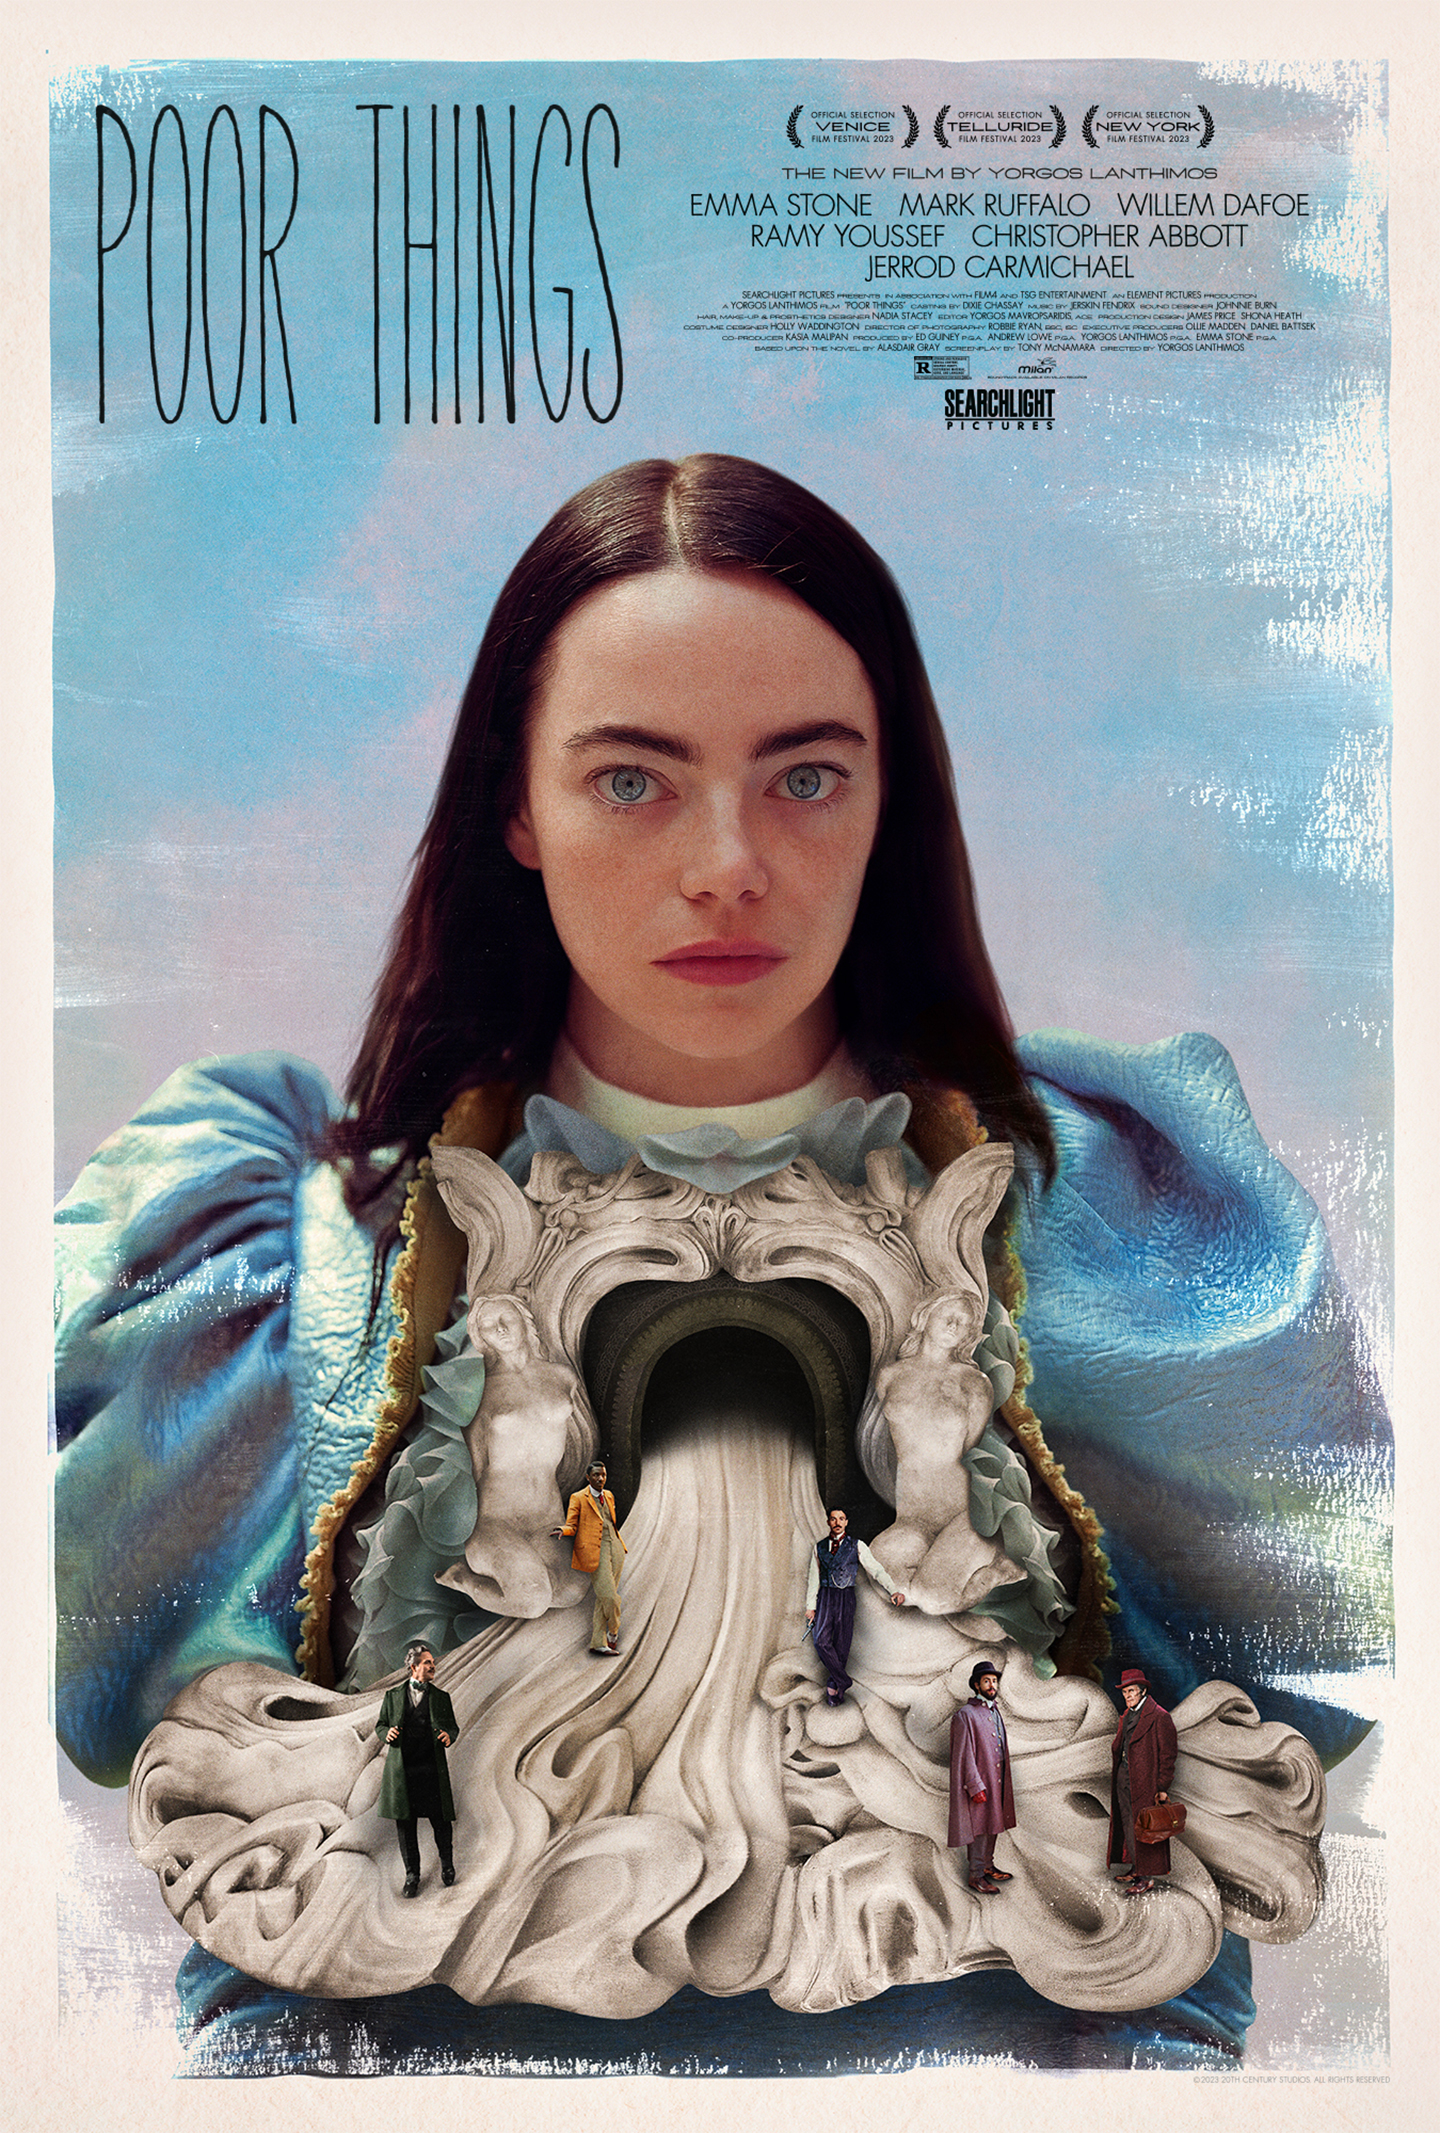 A movie poster for 'Poor Things,' courtesy of Searchlight